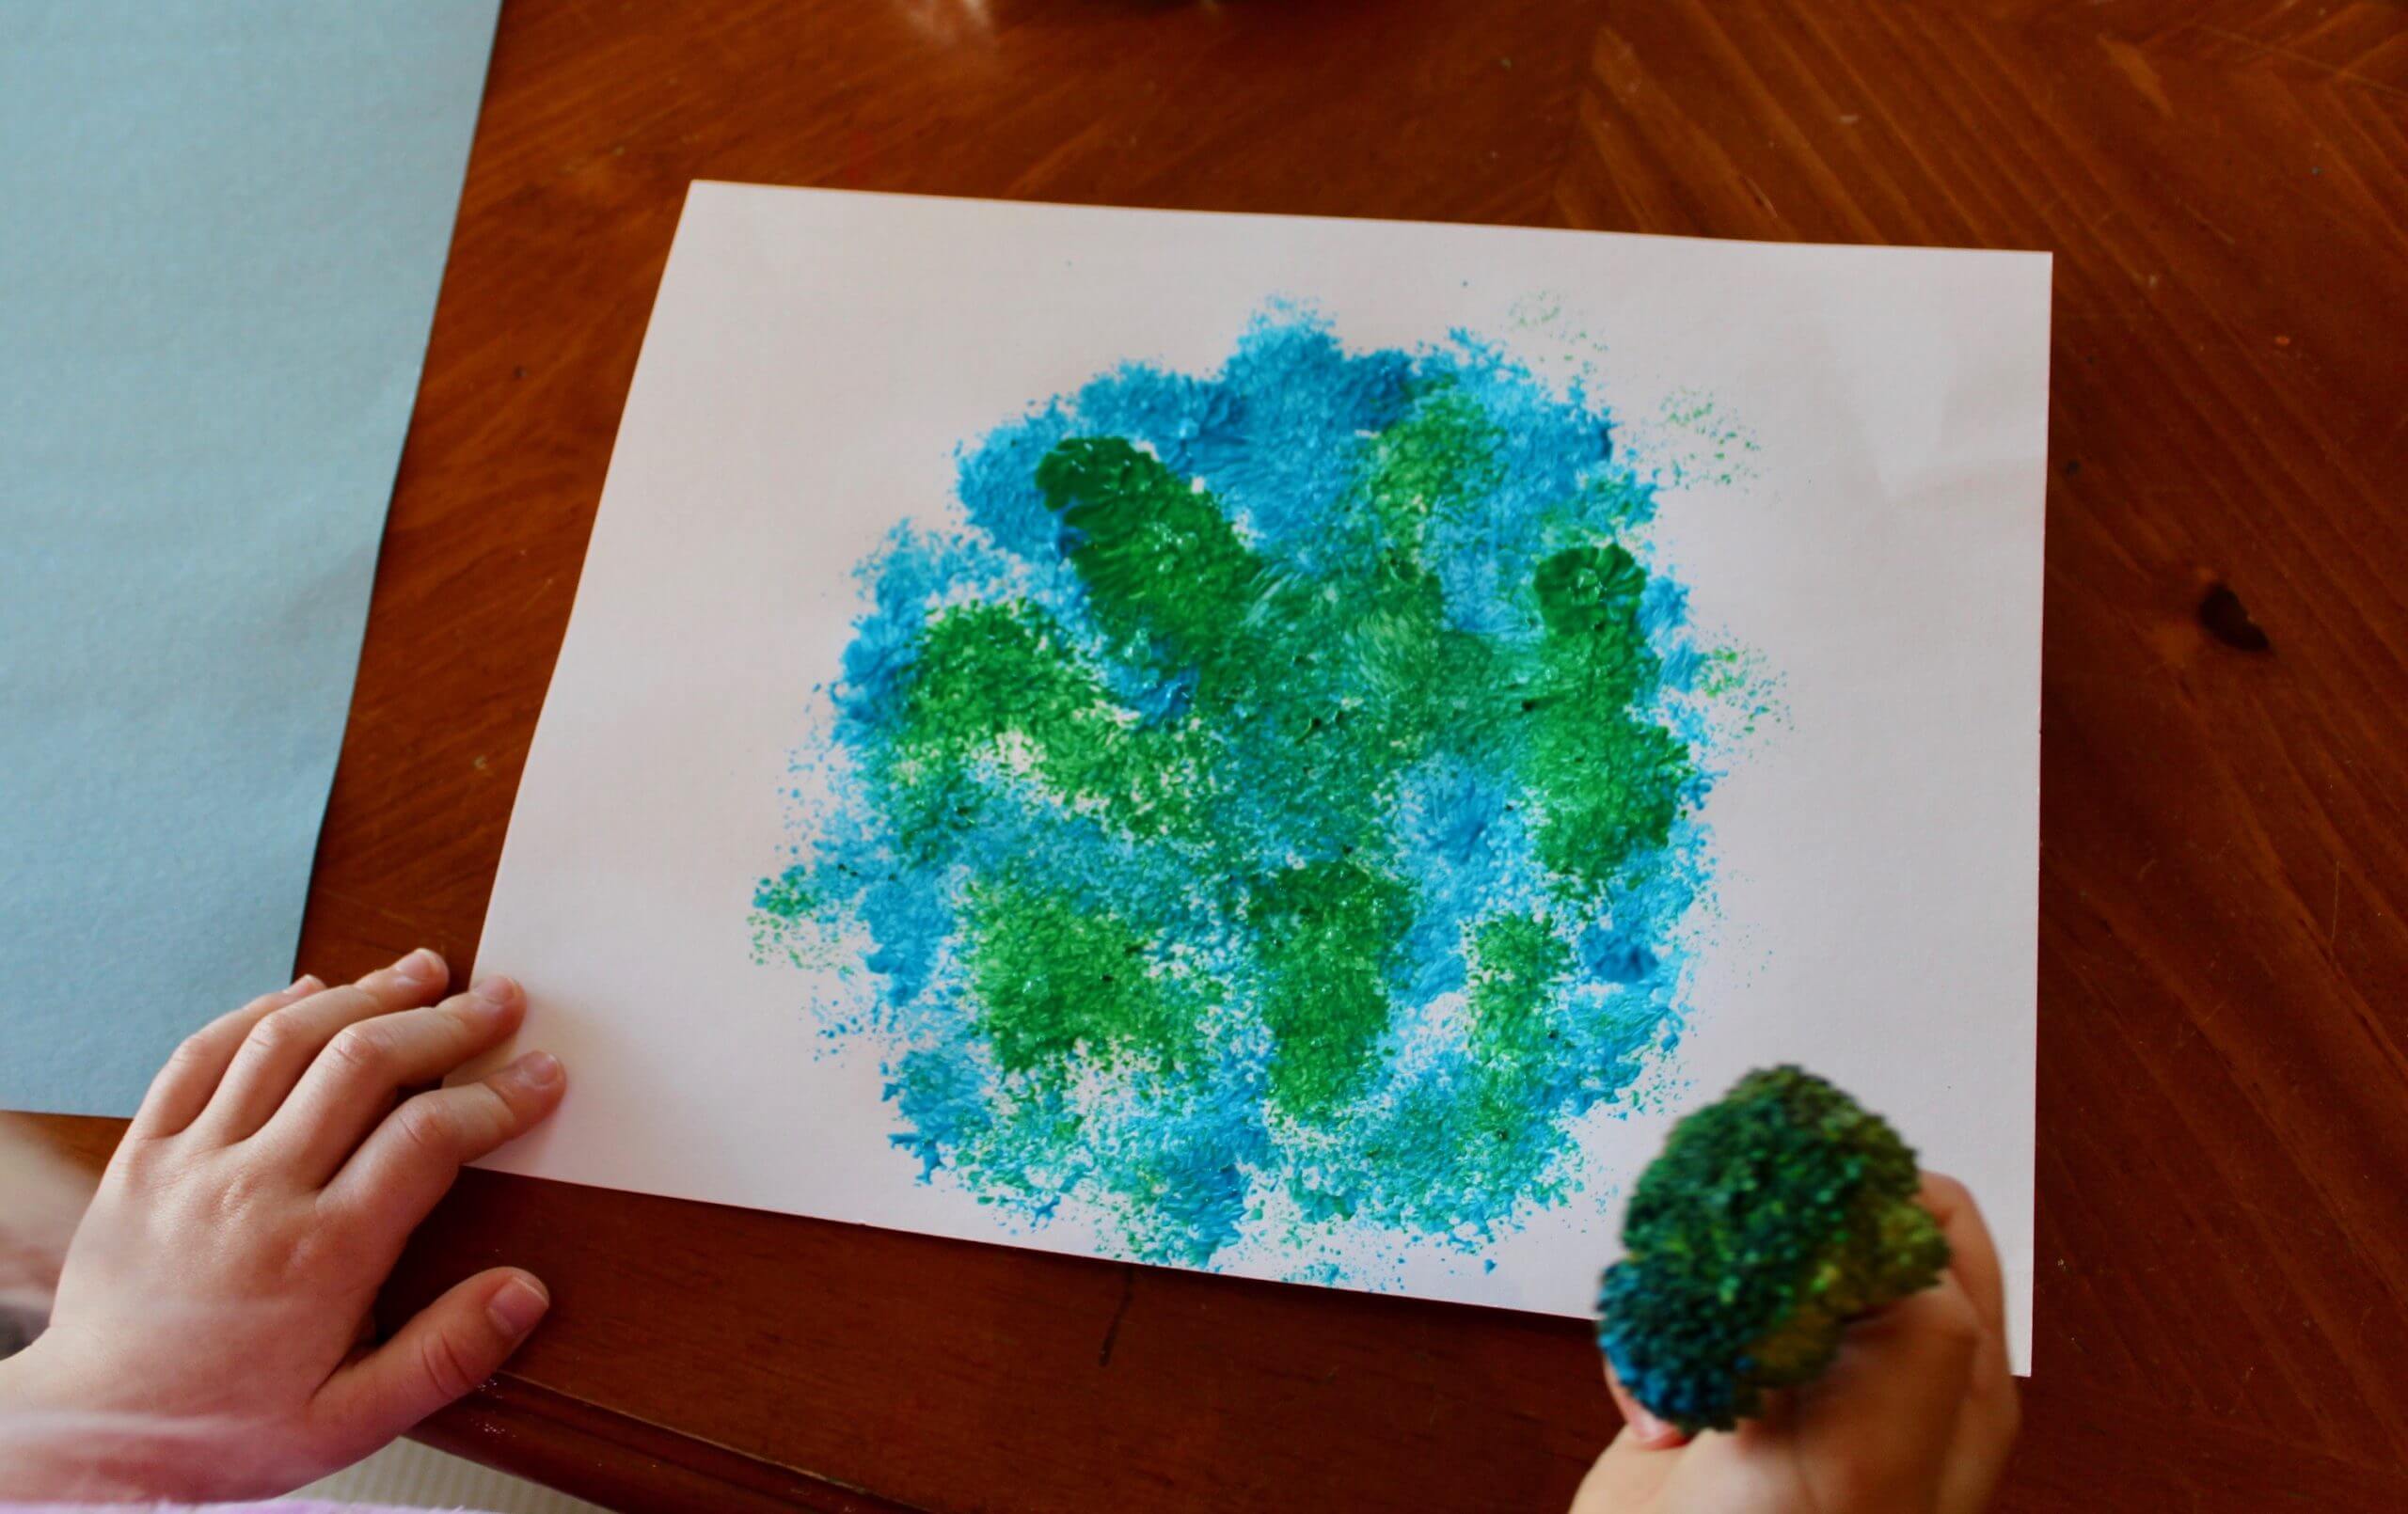 Amazing Vegetable Stamping Art For Environment DayStamping Art Ideas for Earth Day